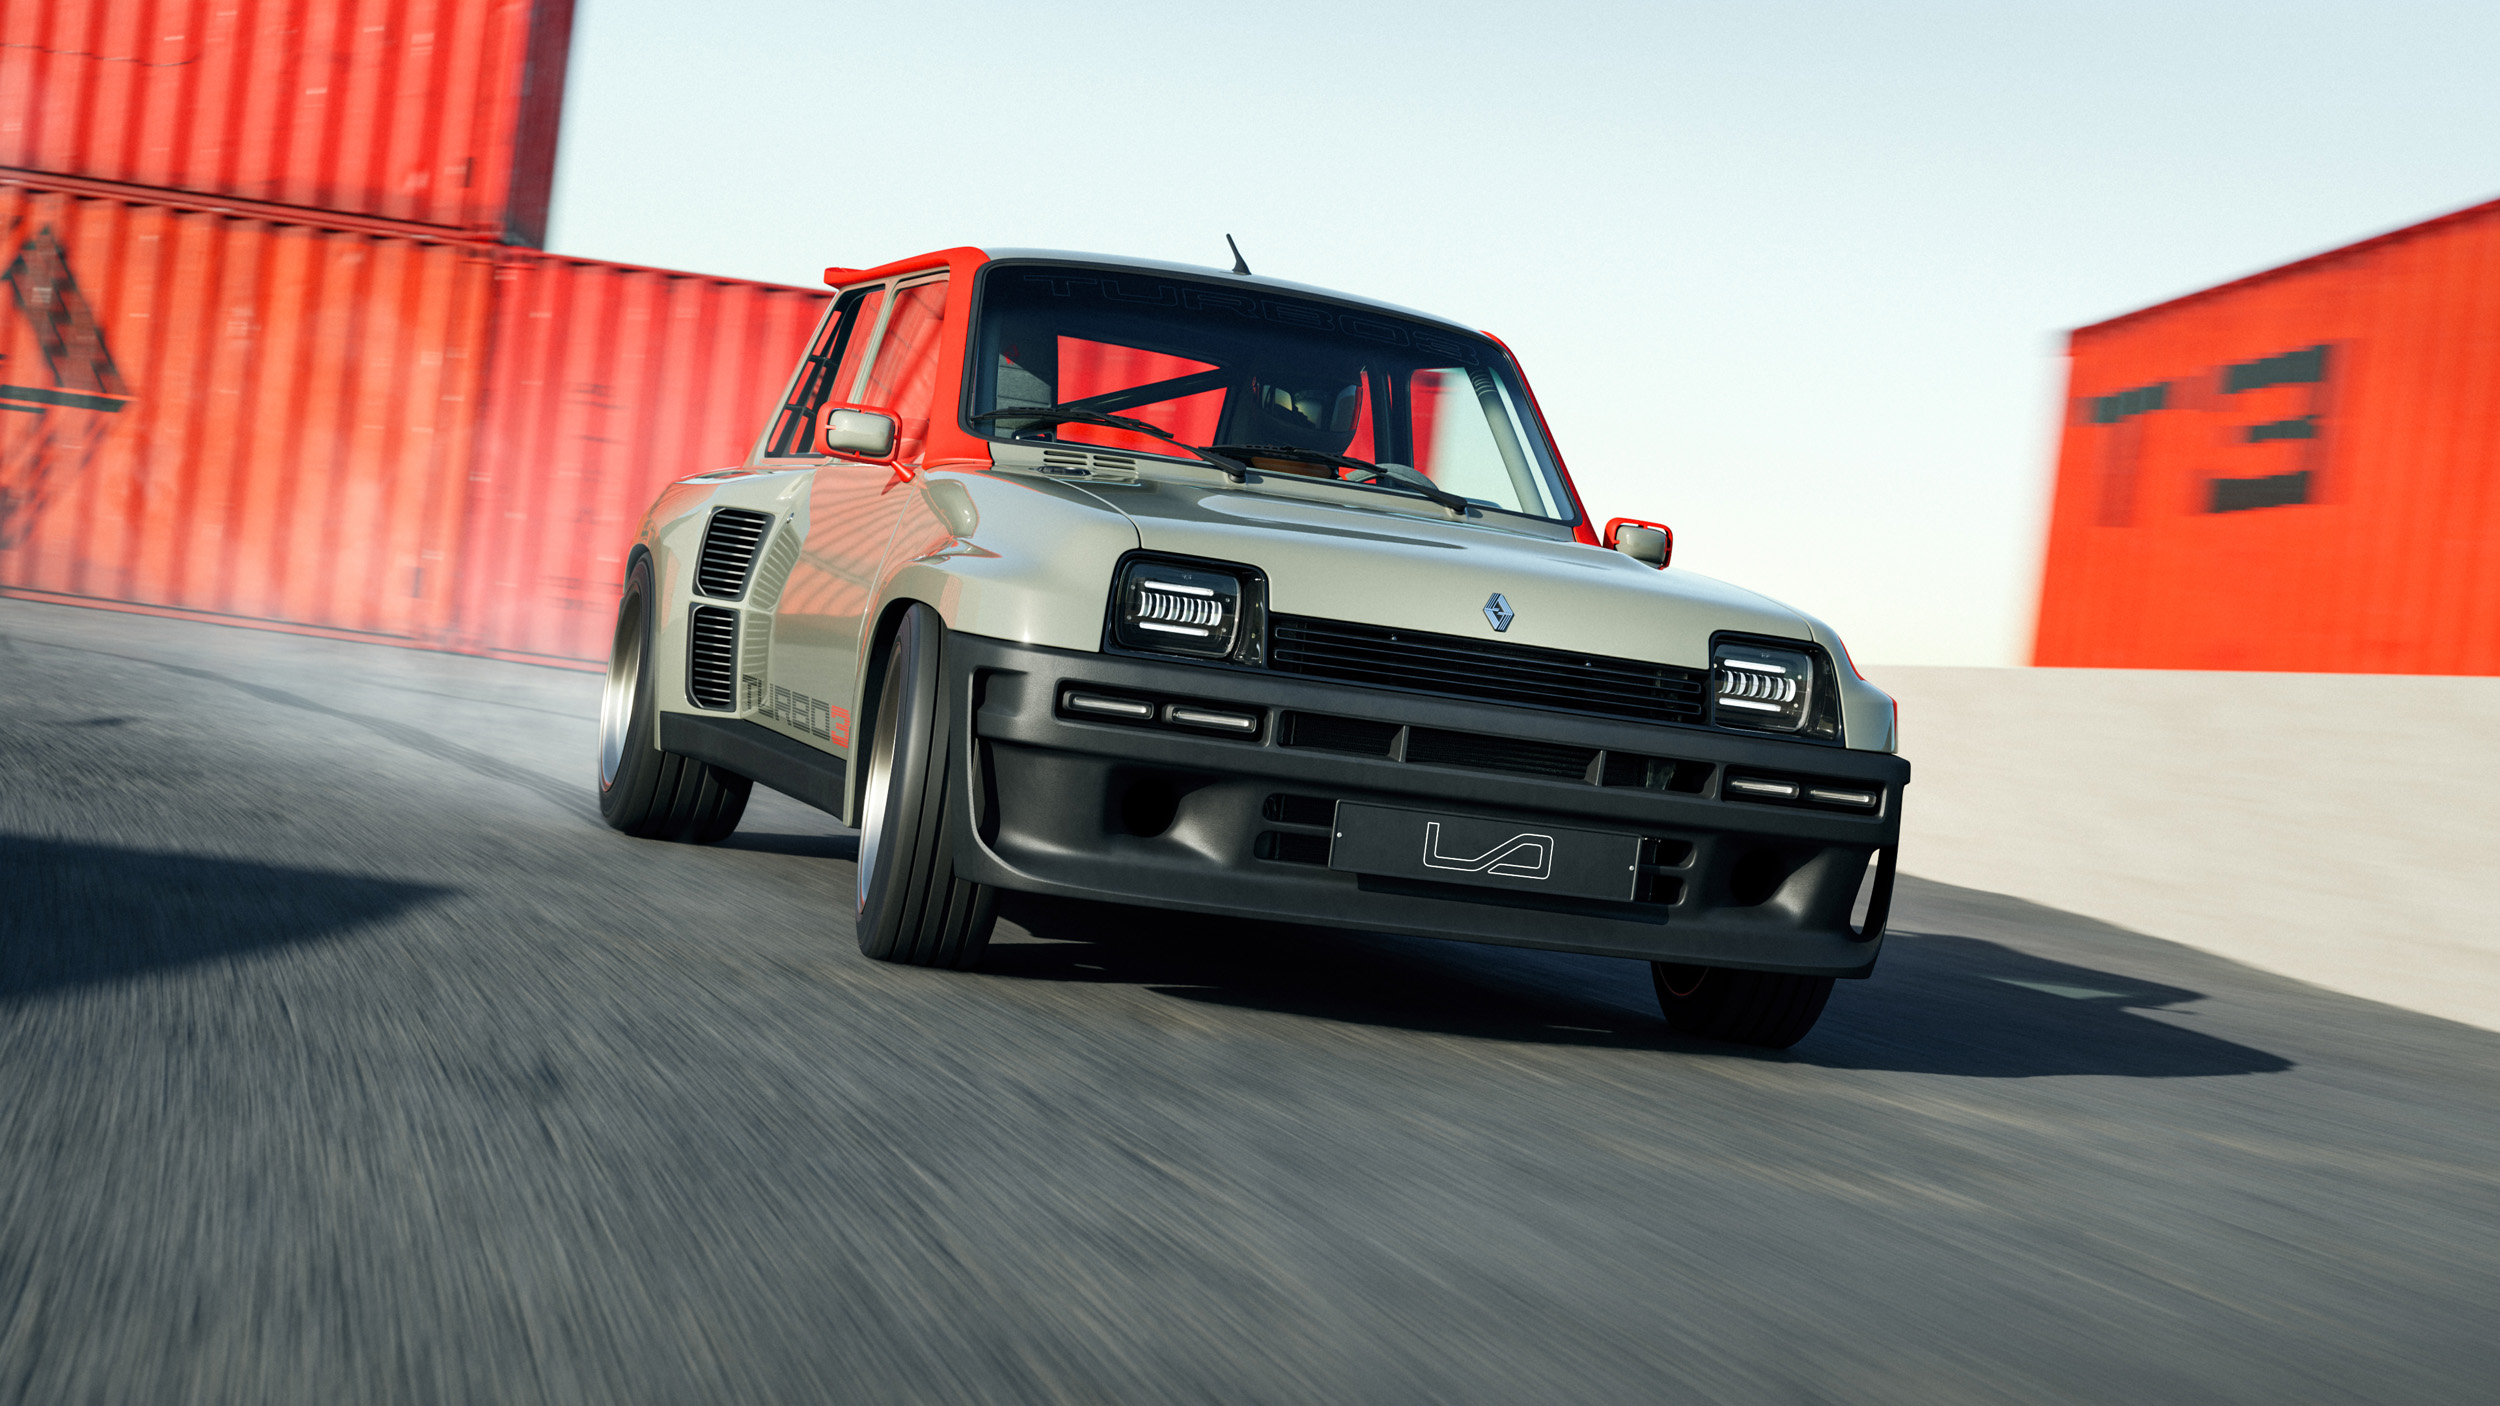 Renault 5 Turbo reborn with 400-hp engine and carbon fiber body - Autoblog